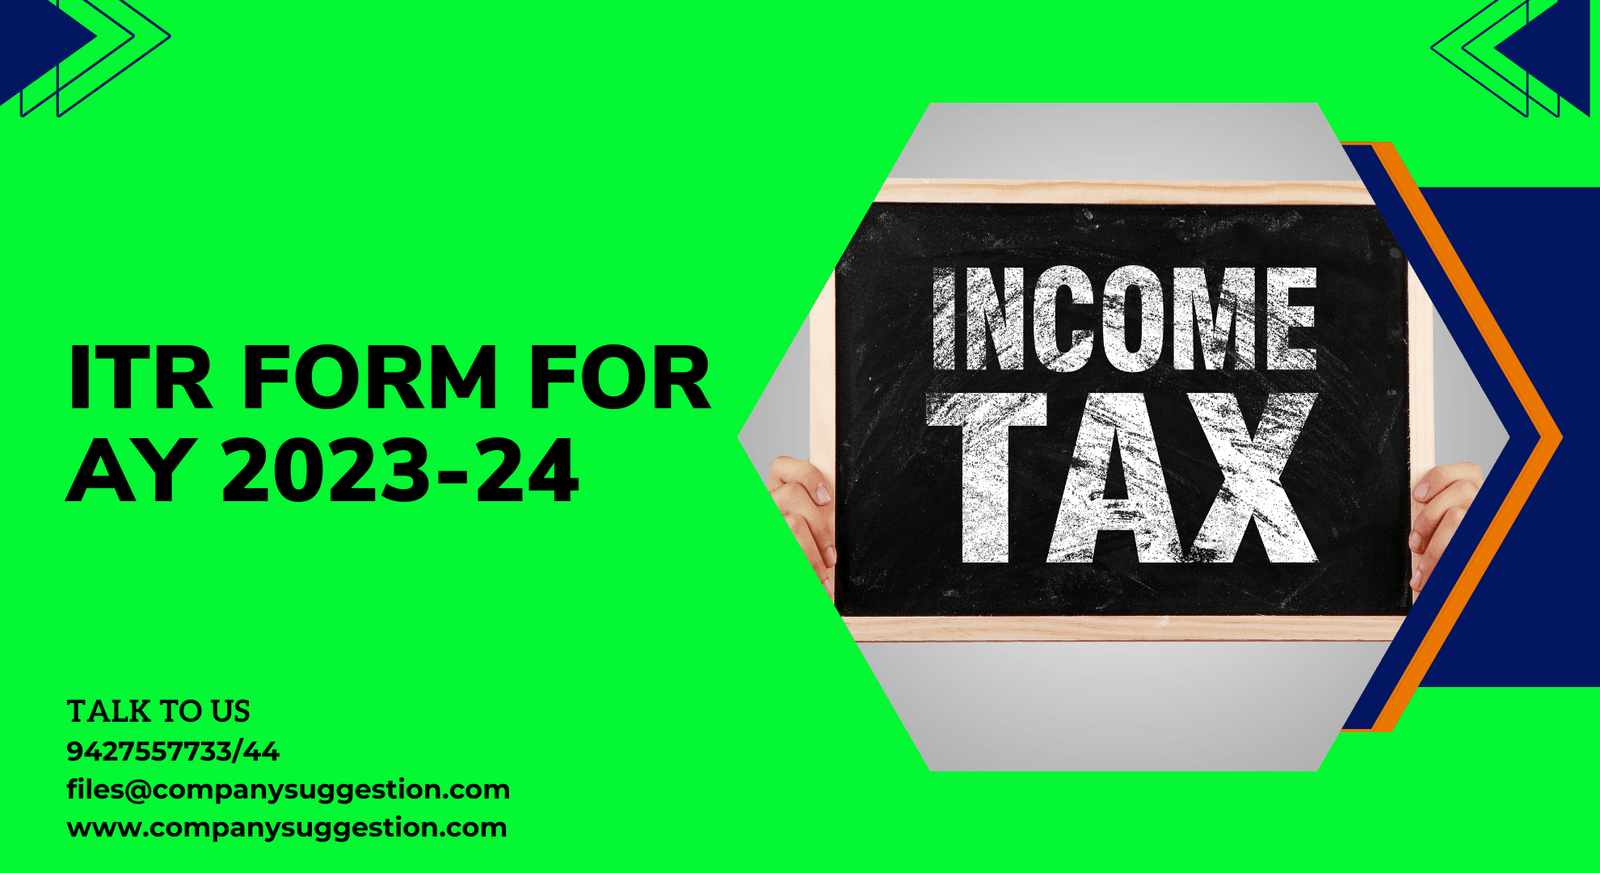 ITR FORM FOR AY 2023-24